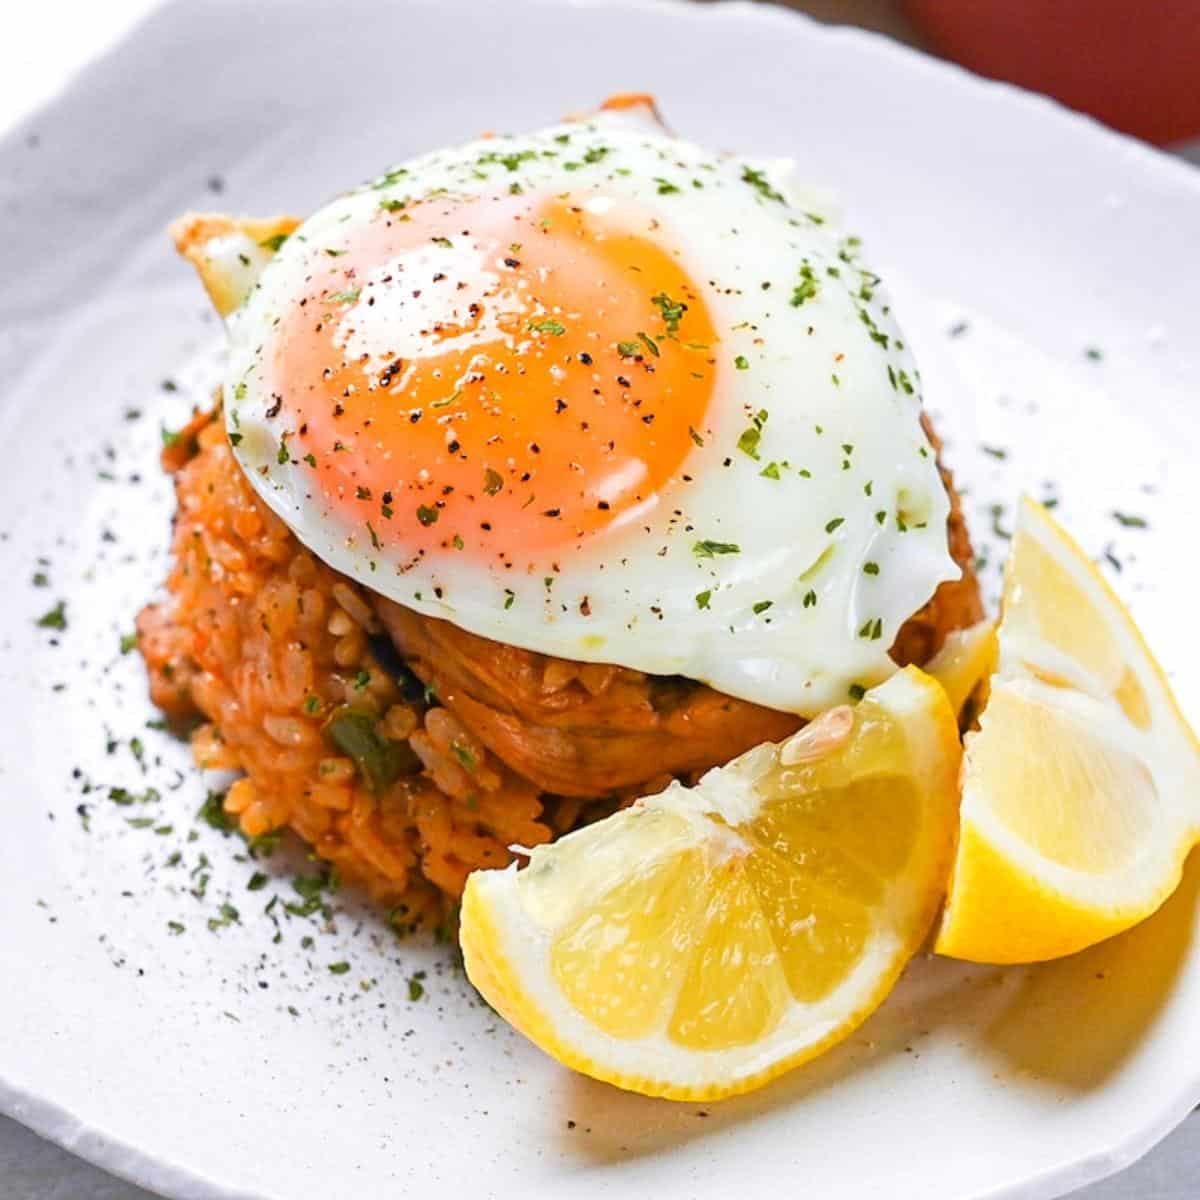 Japanese ketchup rice (chicken rice) topped with egg and served with lemon wedges